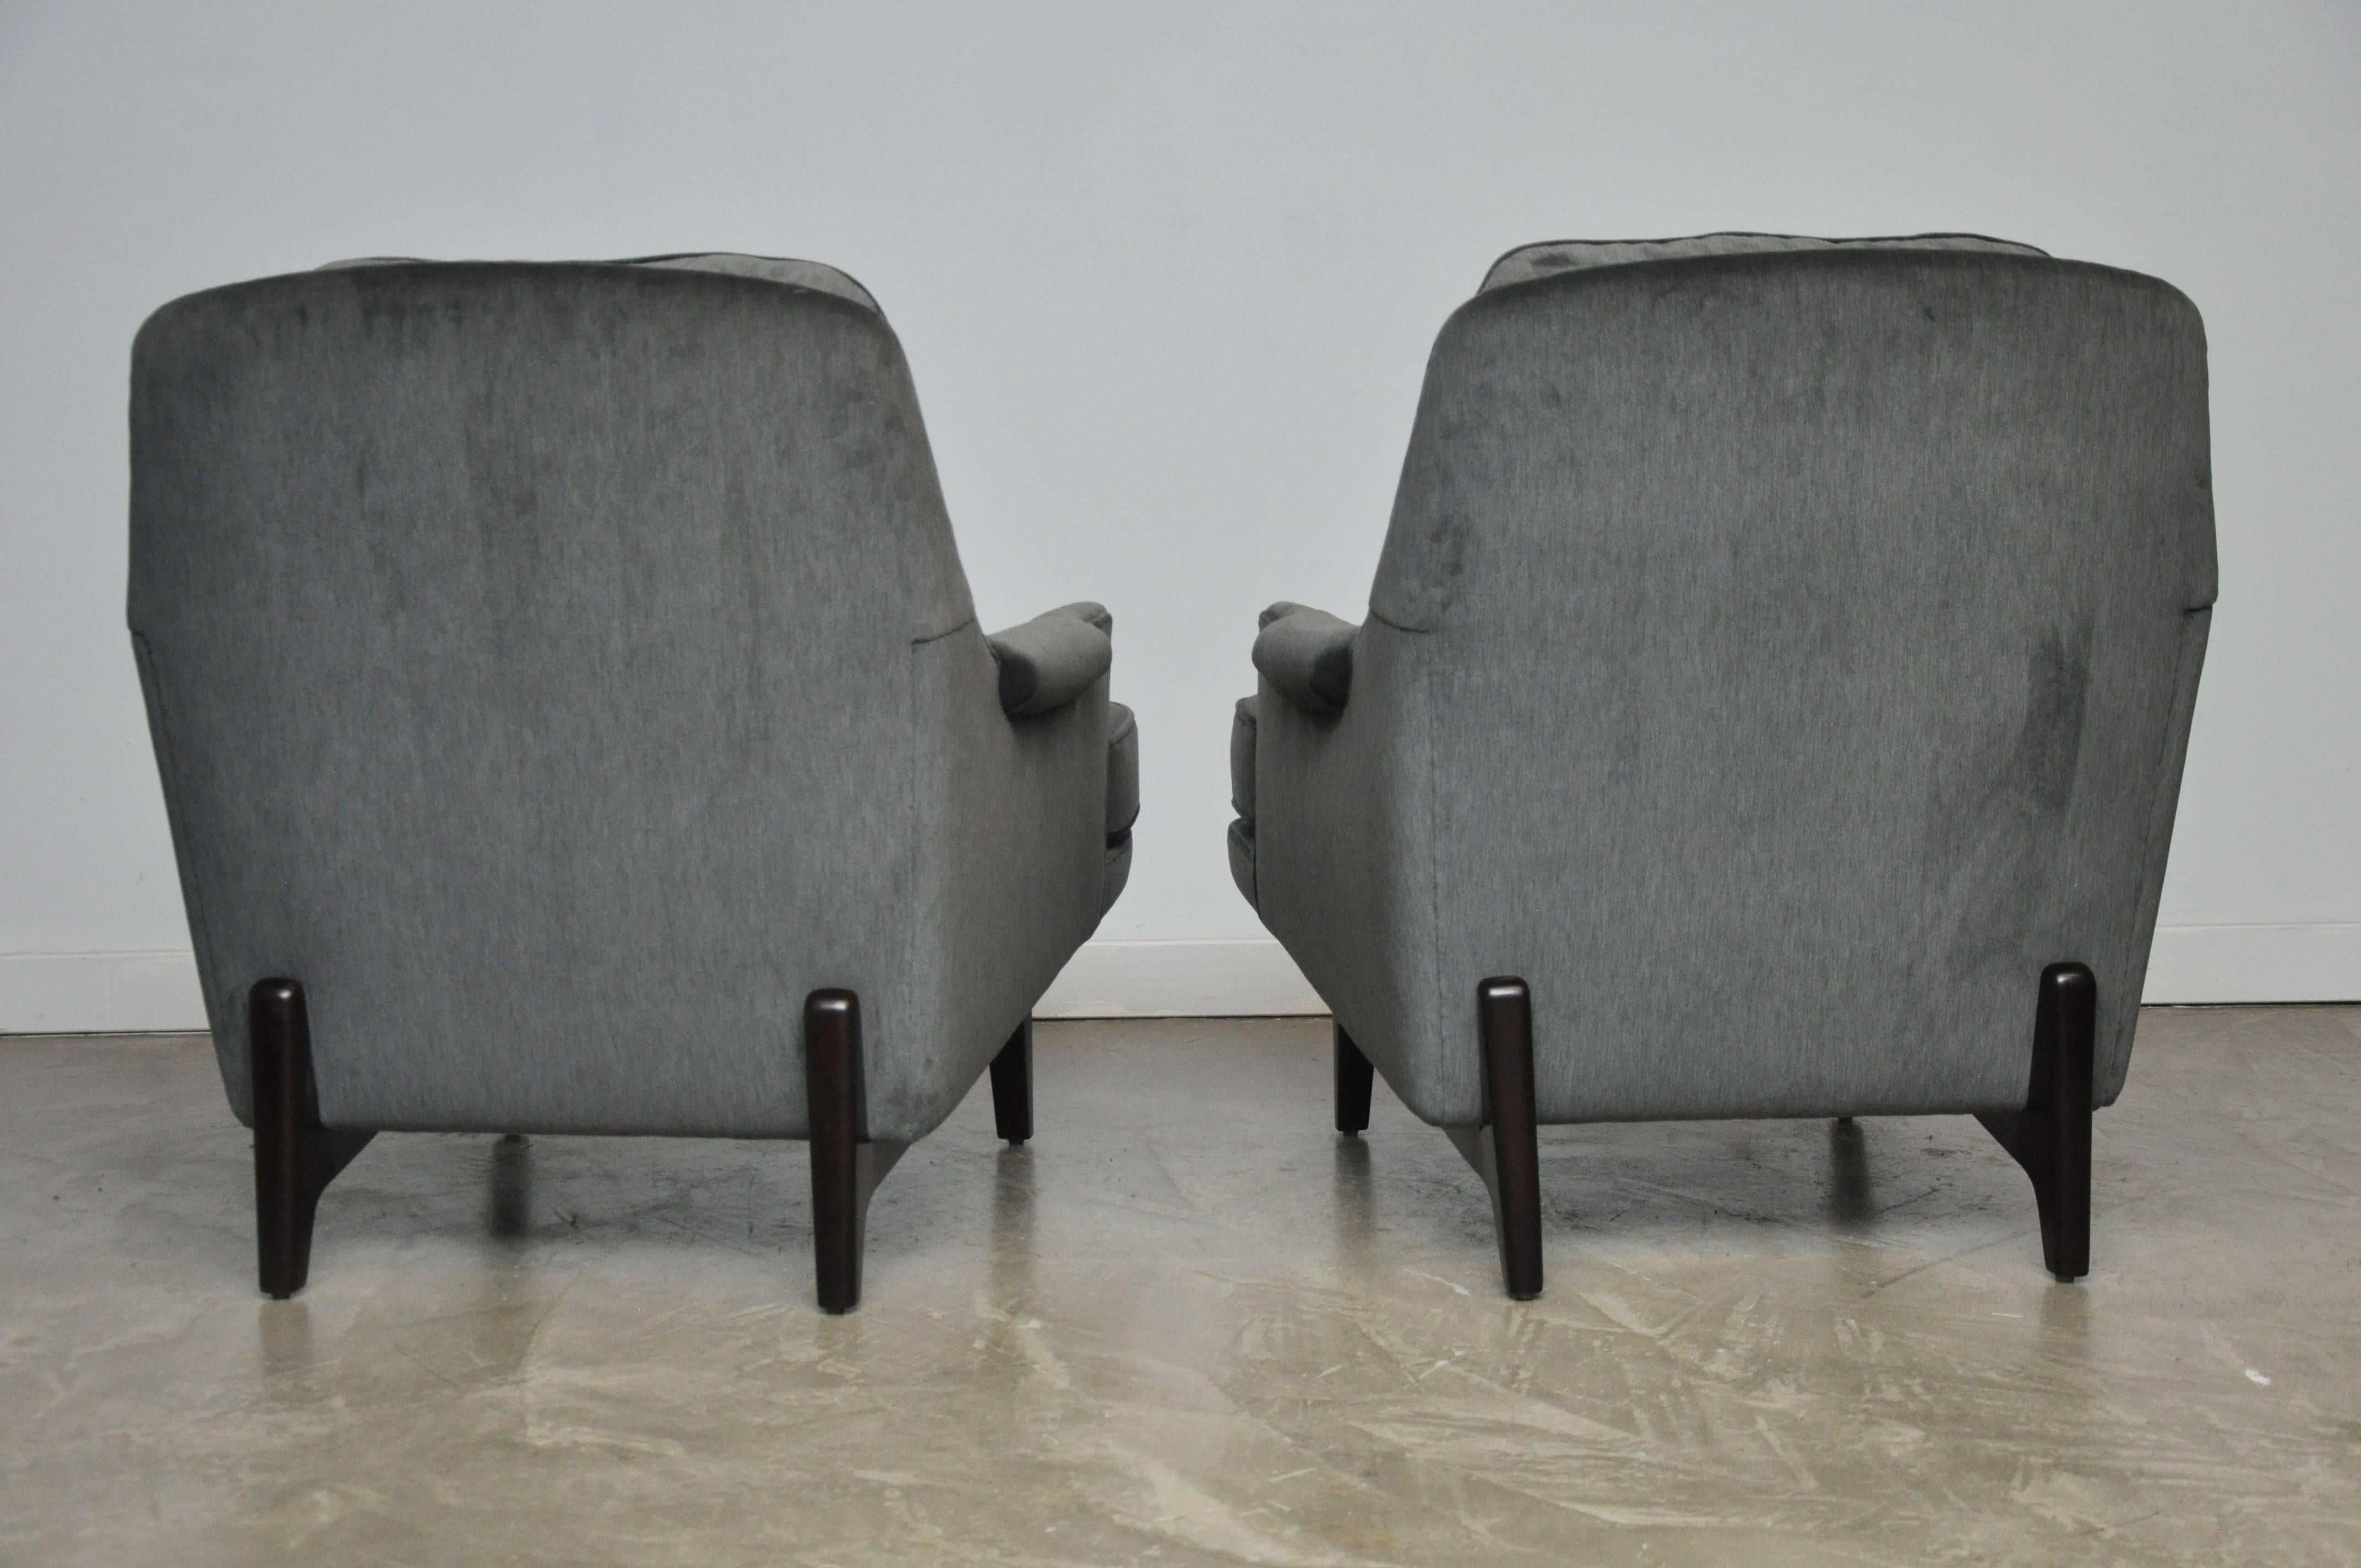 Pair of Dunbar lounge chairs designed by Roger Sprunger for Dunbar. Fully restored. Refinished mahogany bases in Classic espresso tone. New cushions, foam and soft grey velvet. Beautiful form.